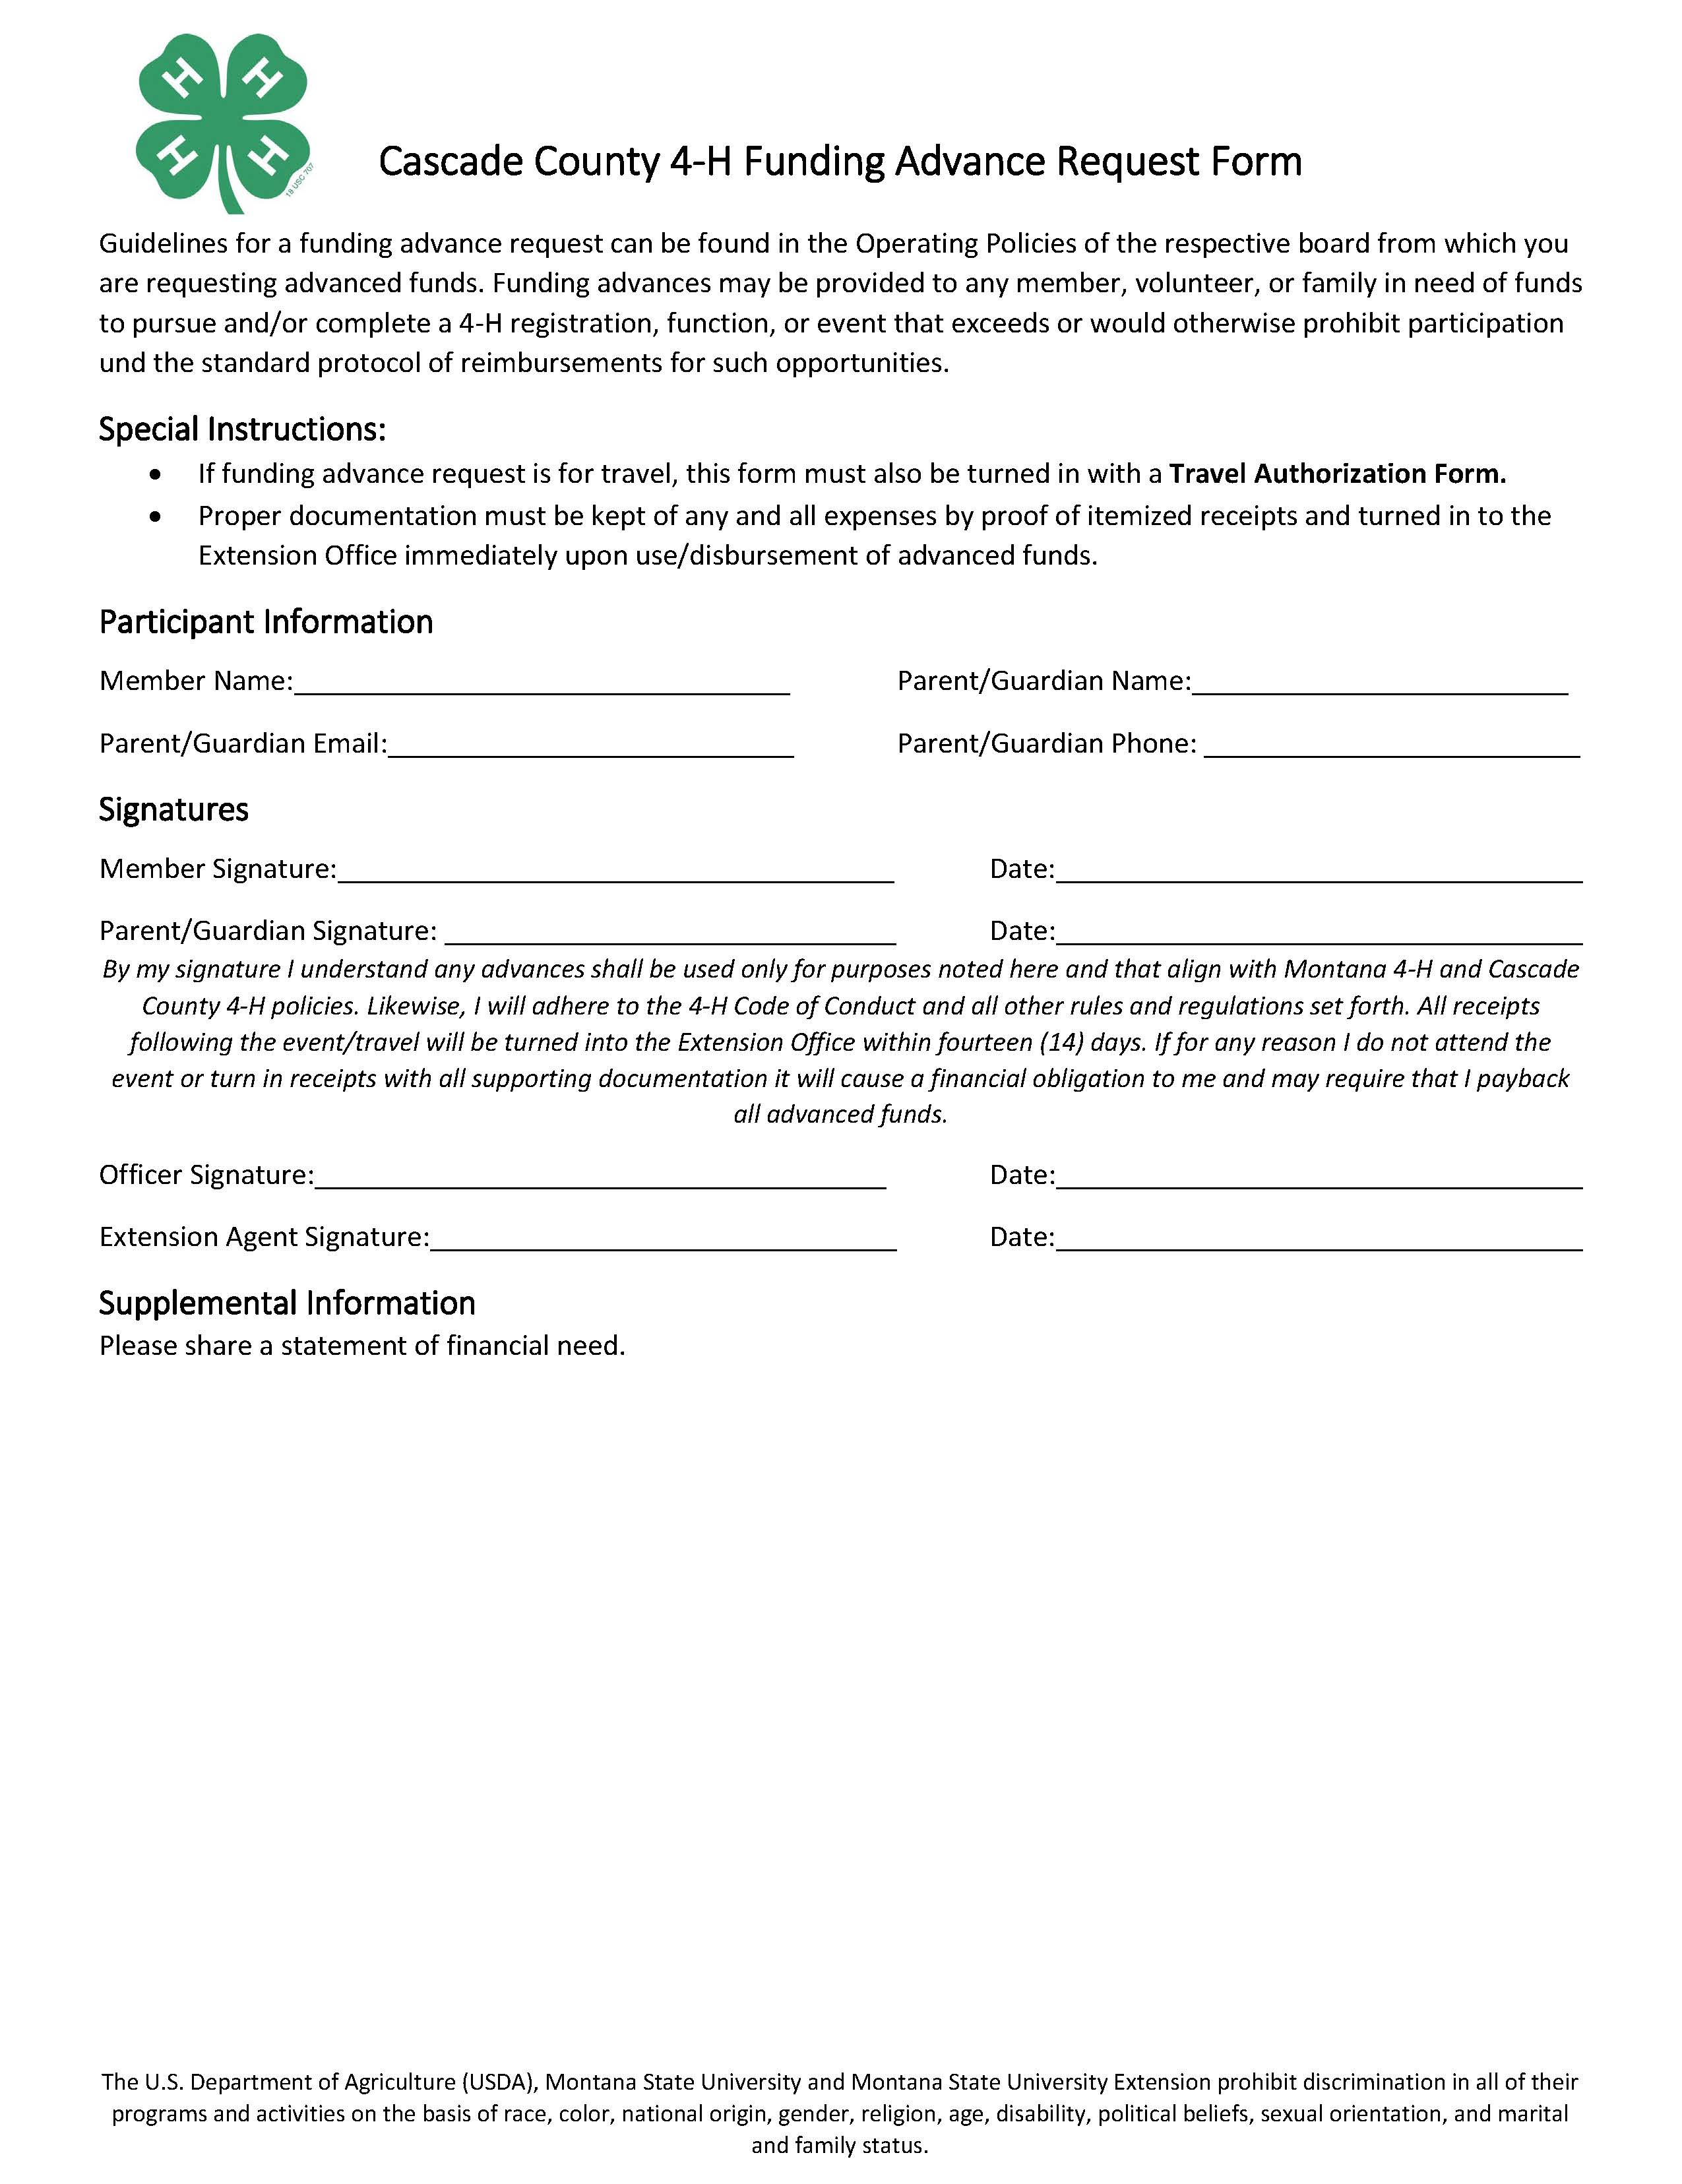 Image of the funding advance request form